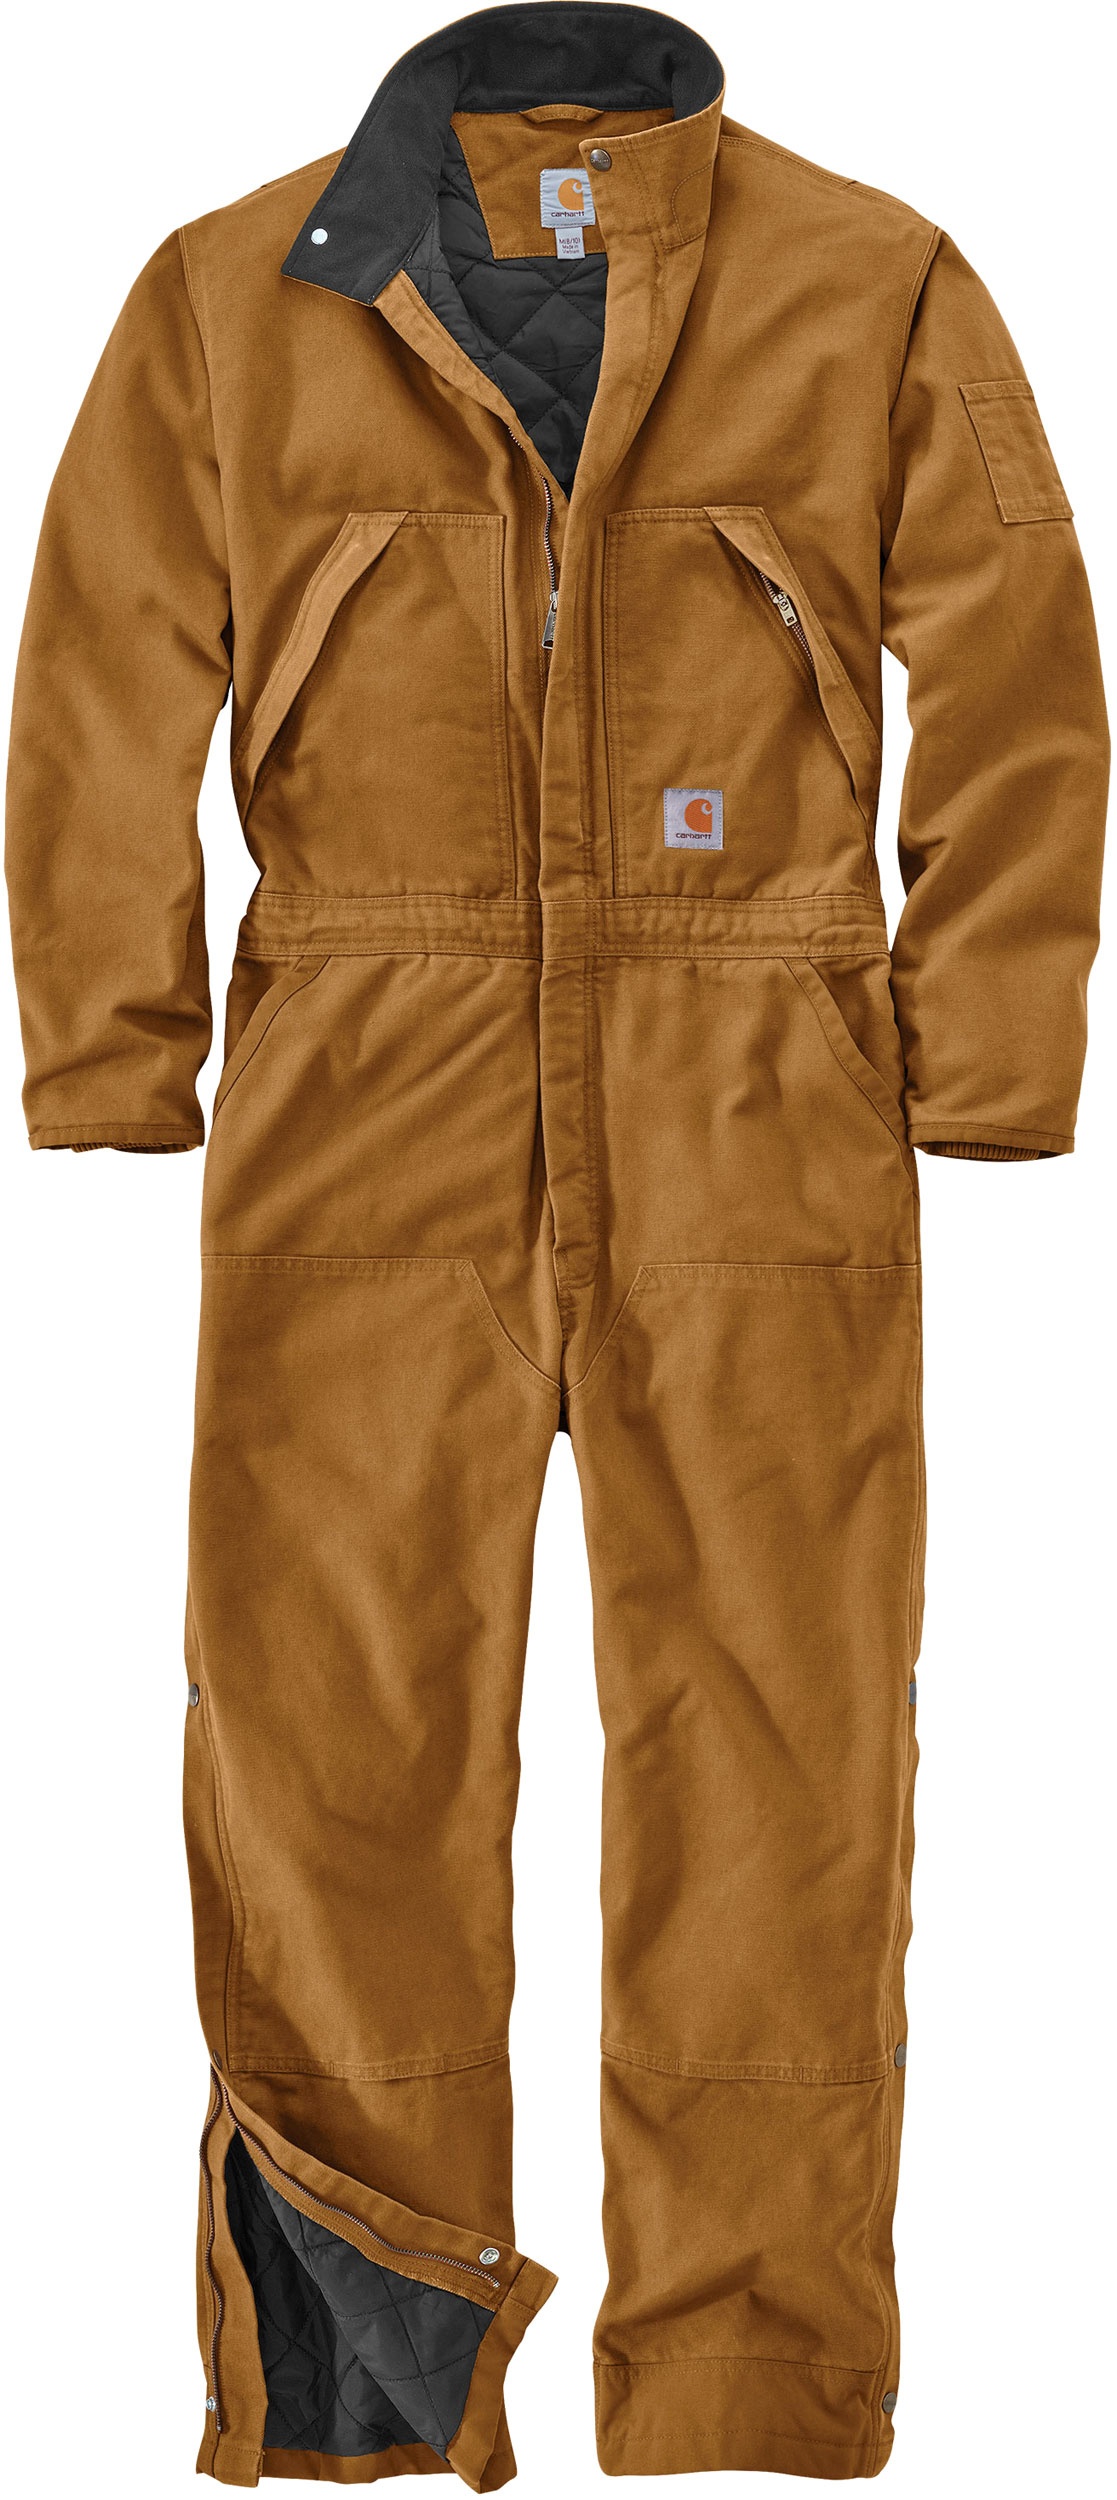 Carhartt Washed Duck Insulated, global - Marron Clair - XXL